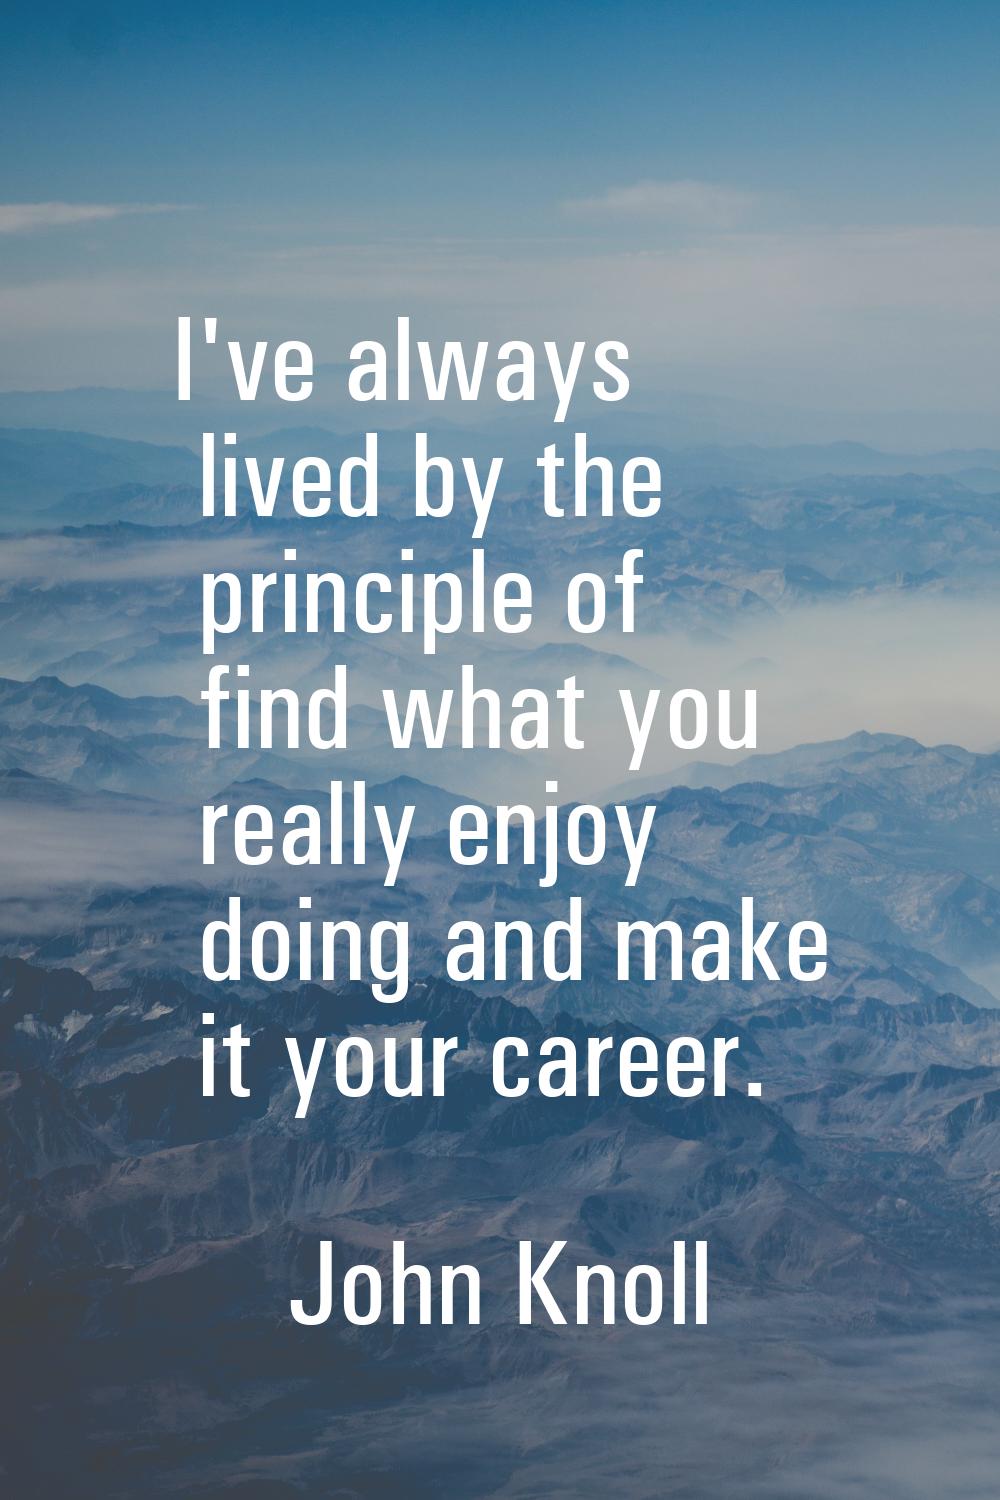 I've always lived by the principle of find what you really enjoy doing and make it your career.